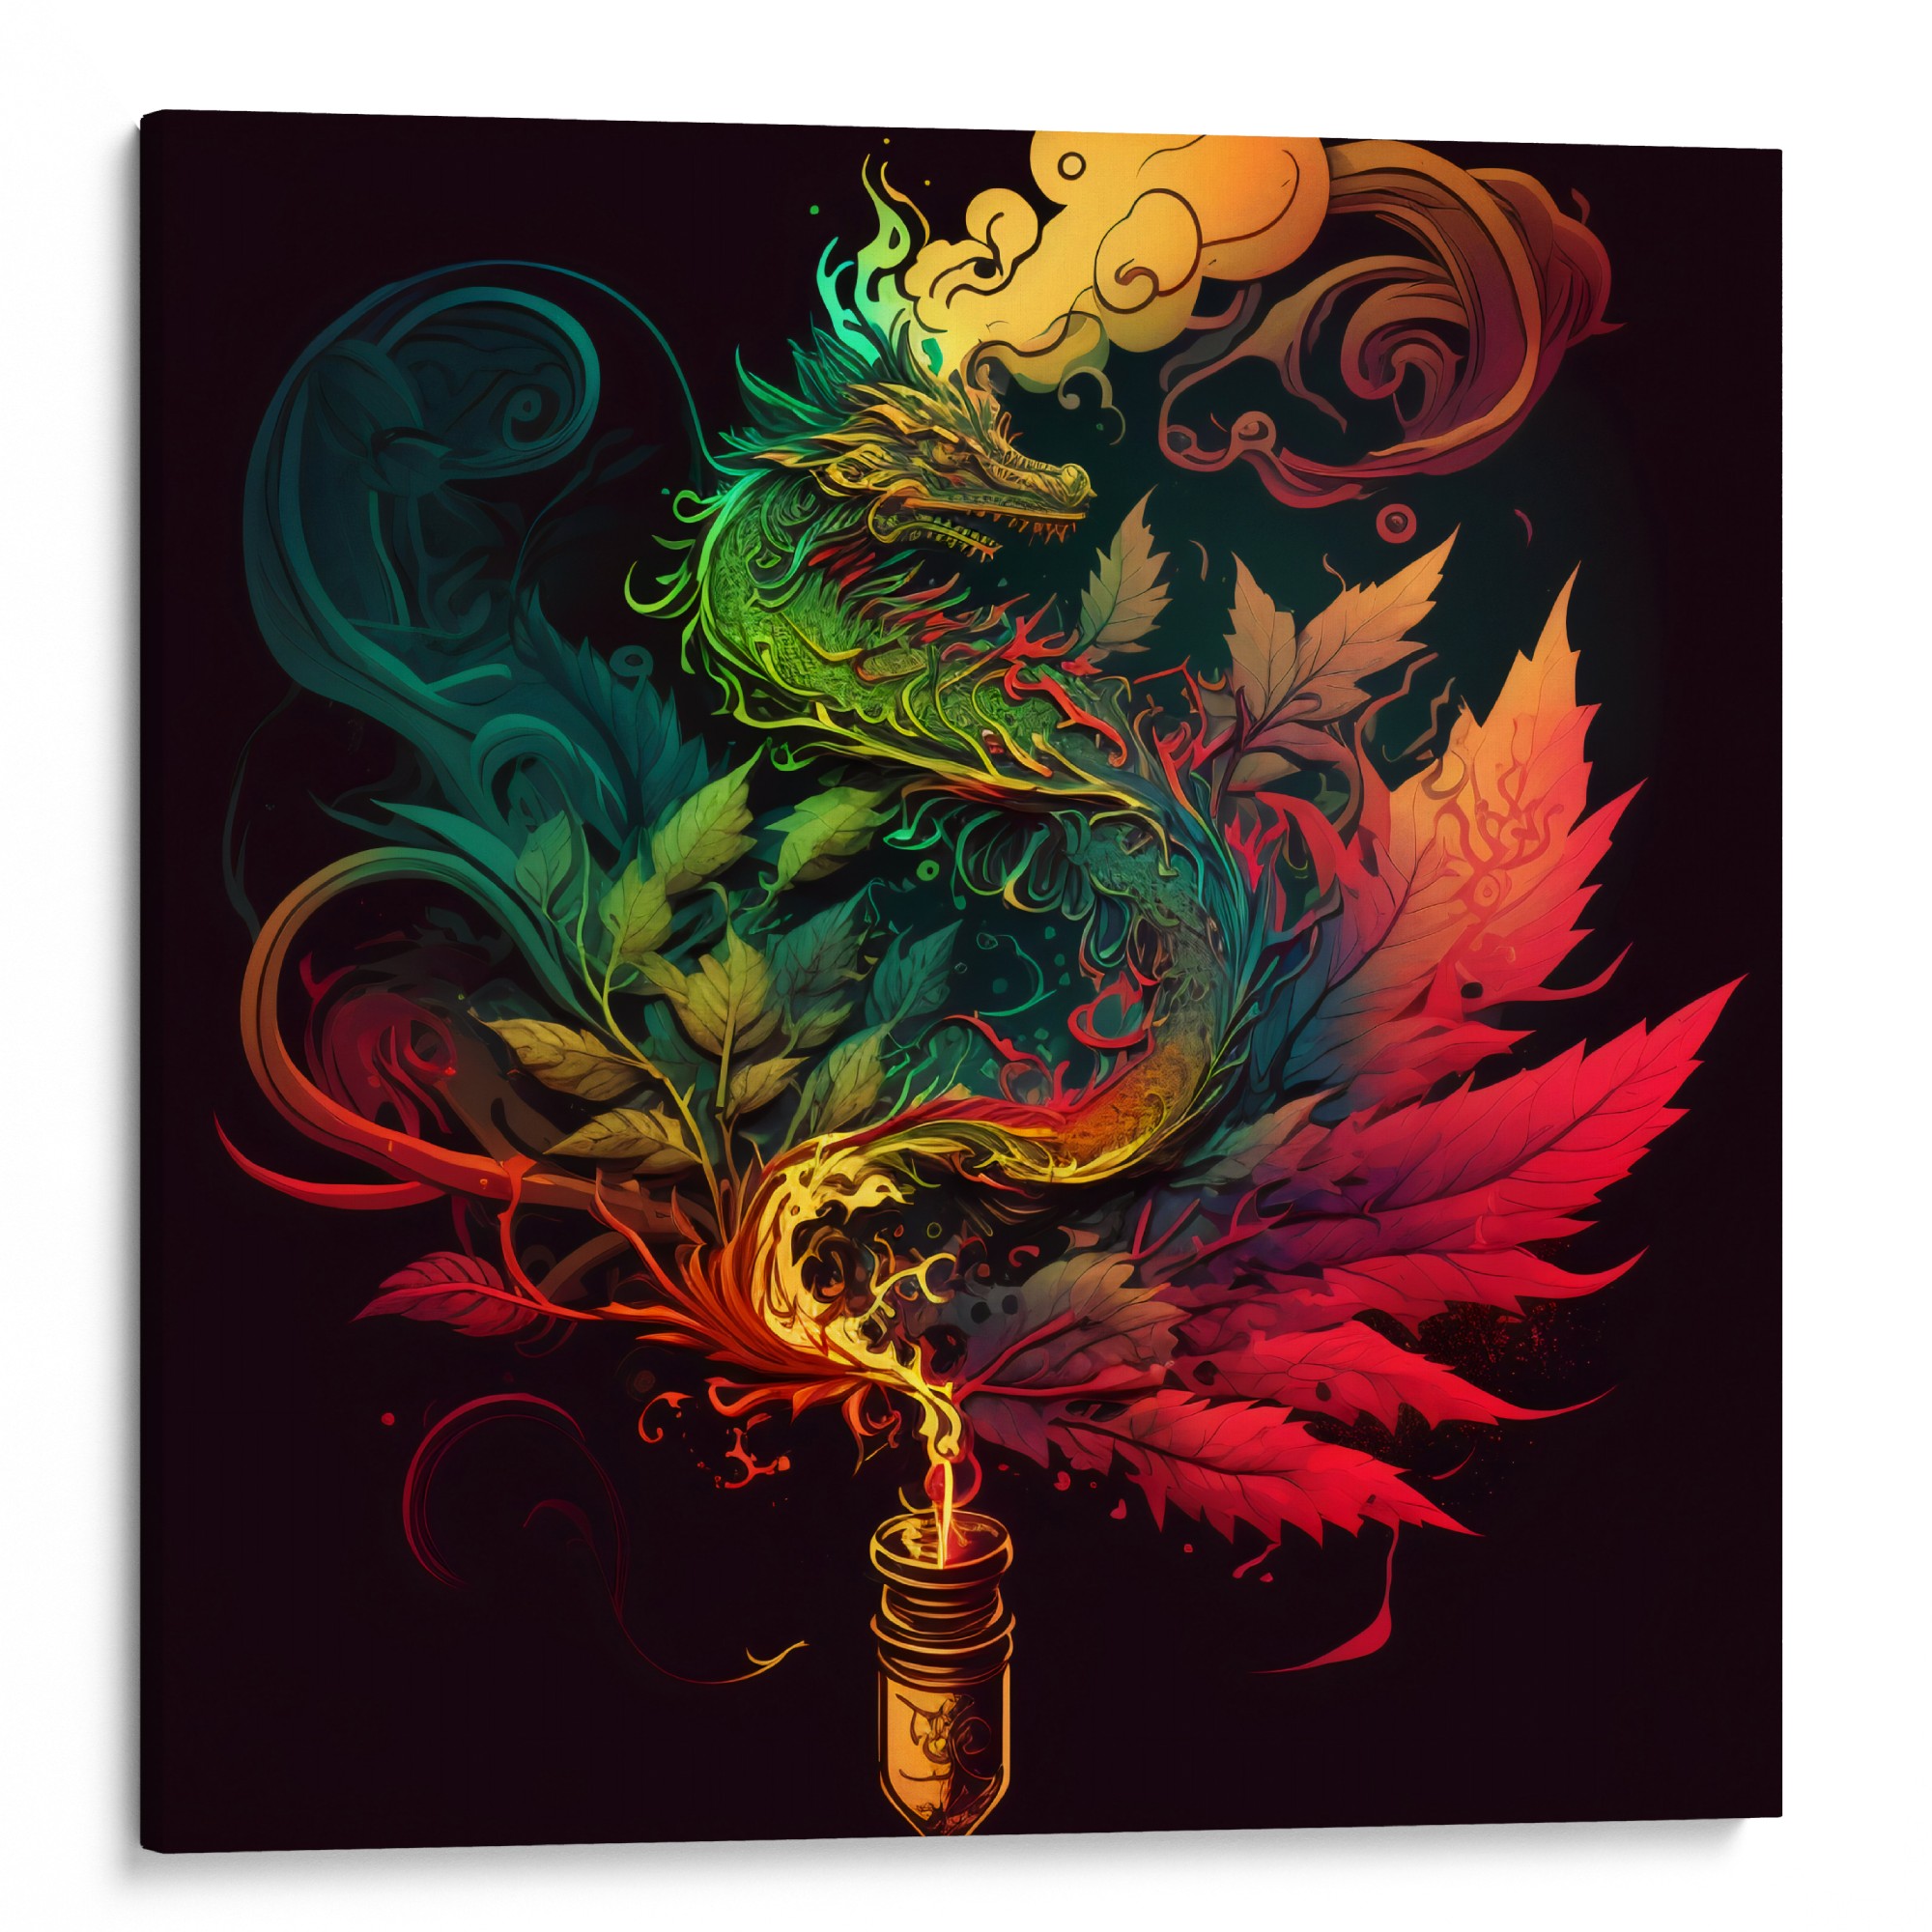 CHASE THE DRAGON Artwork - Lore of ancient potions brought to life for art lovers.